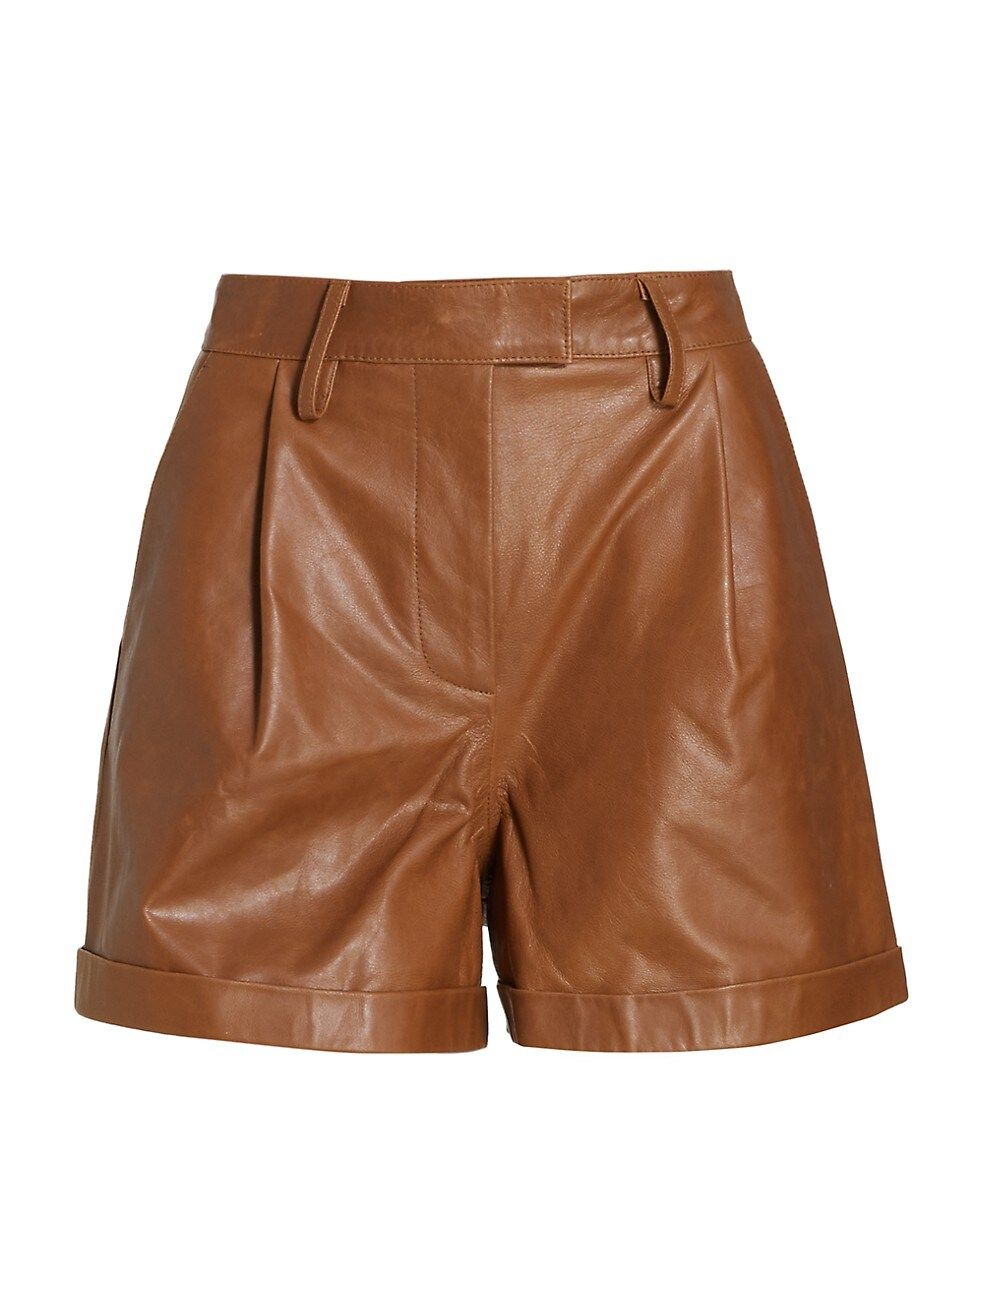 REMAIN Birger Christensen Paola Leather Shorts | Saks Fifth Avenue